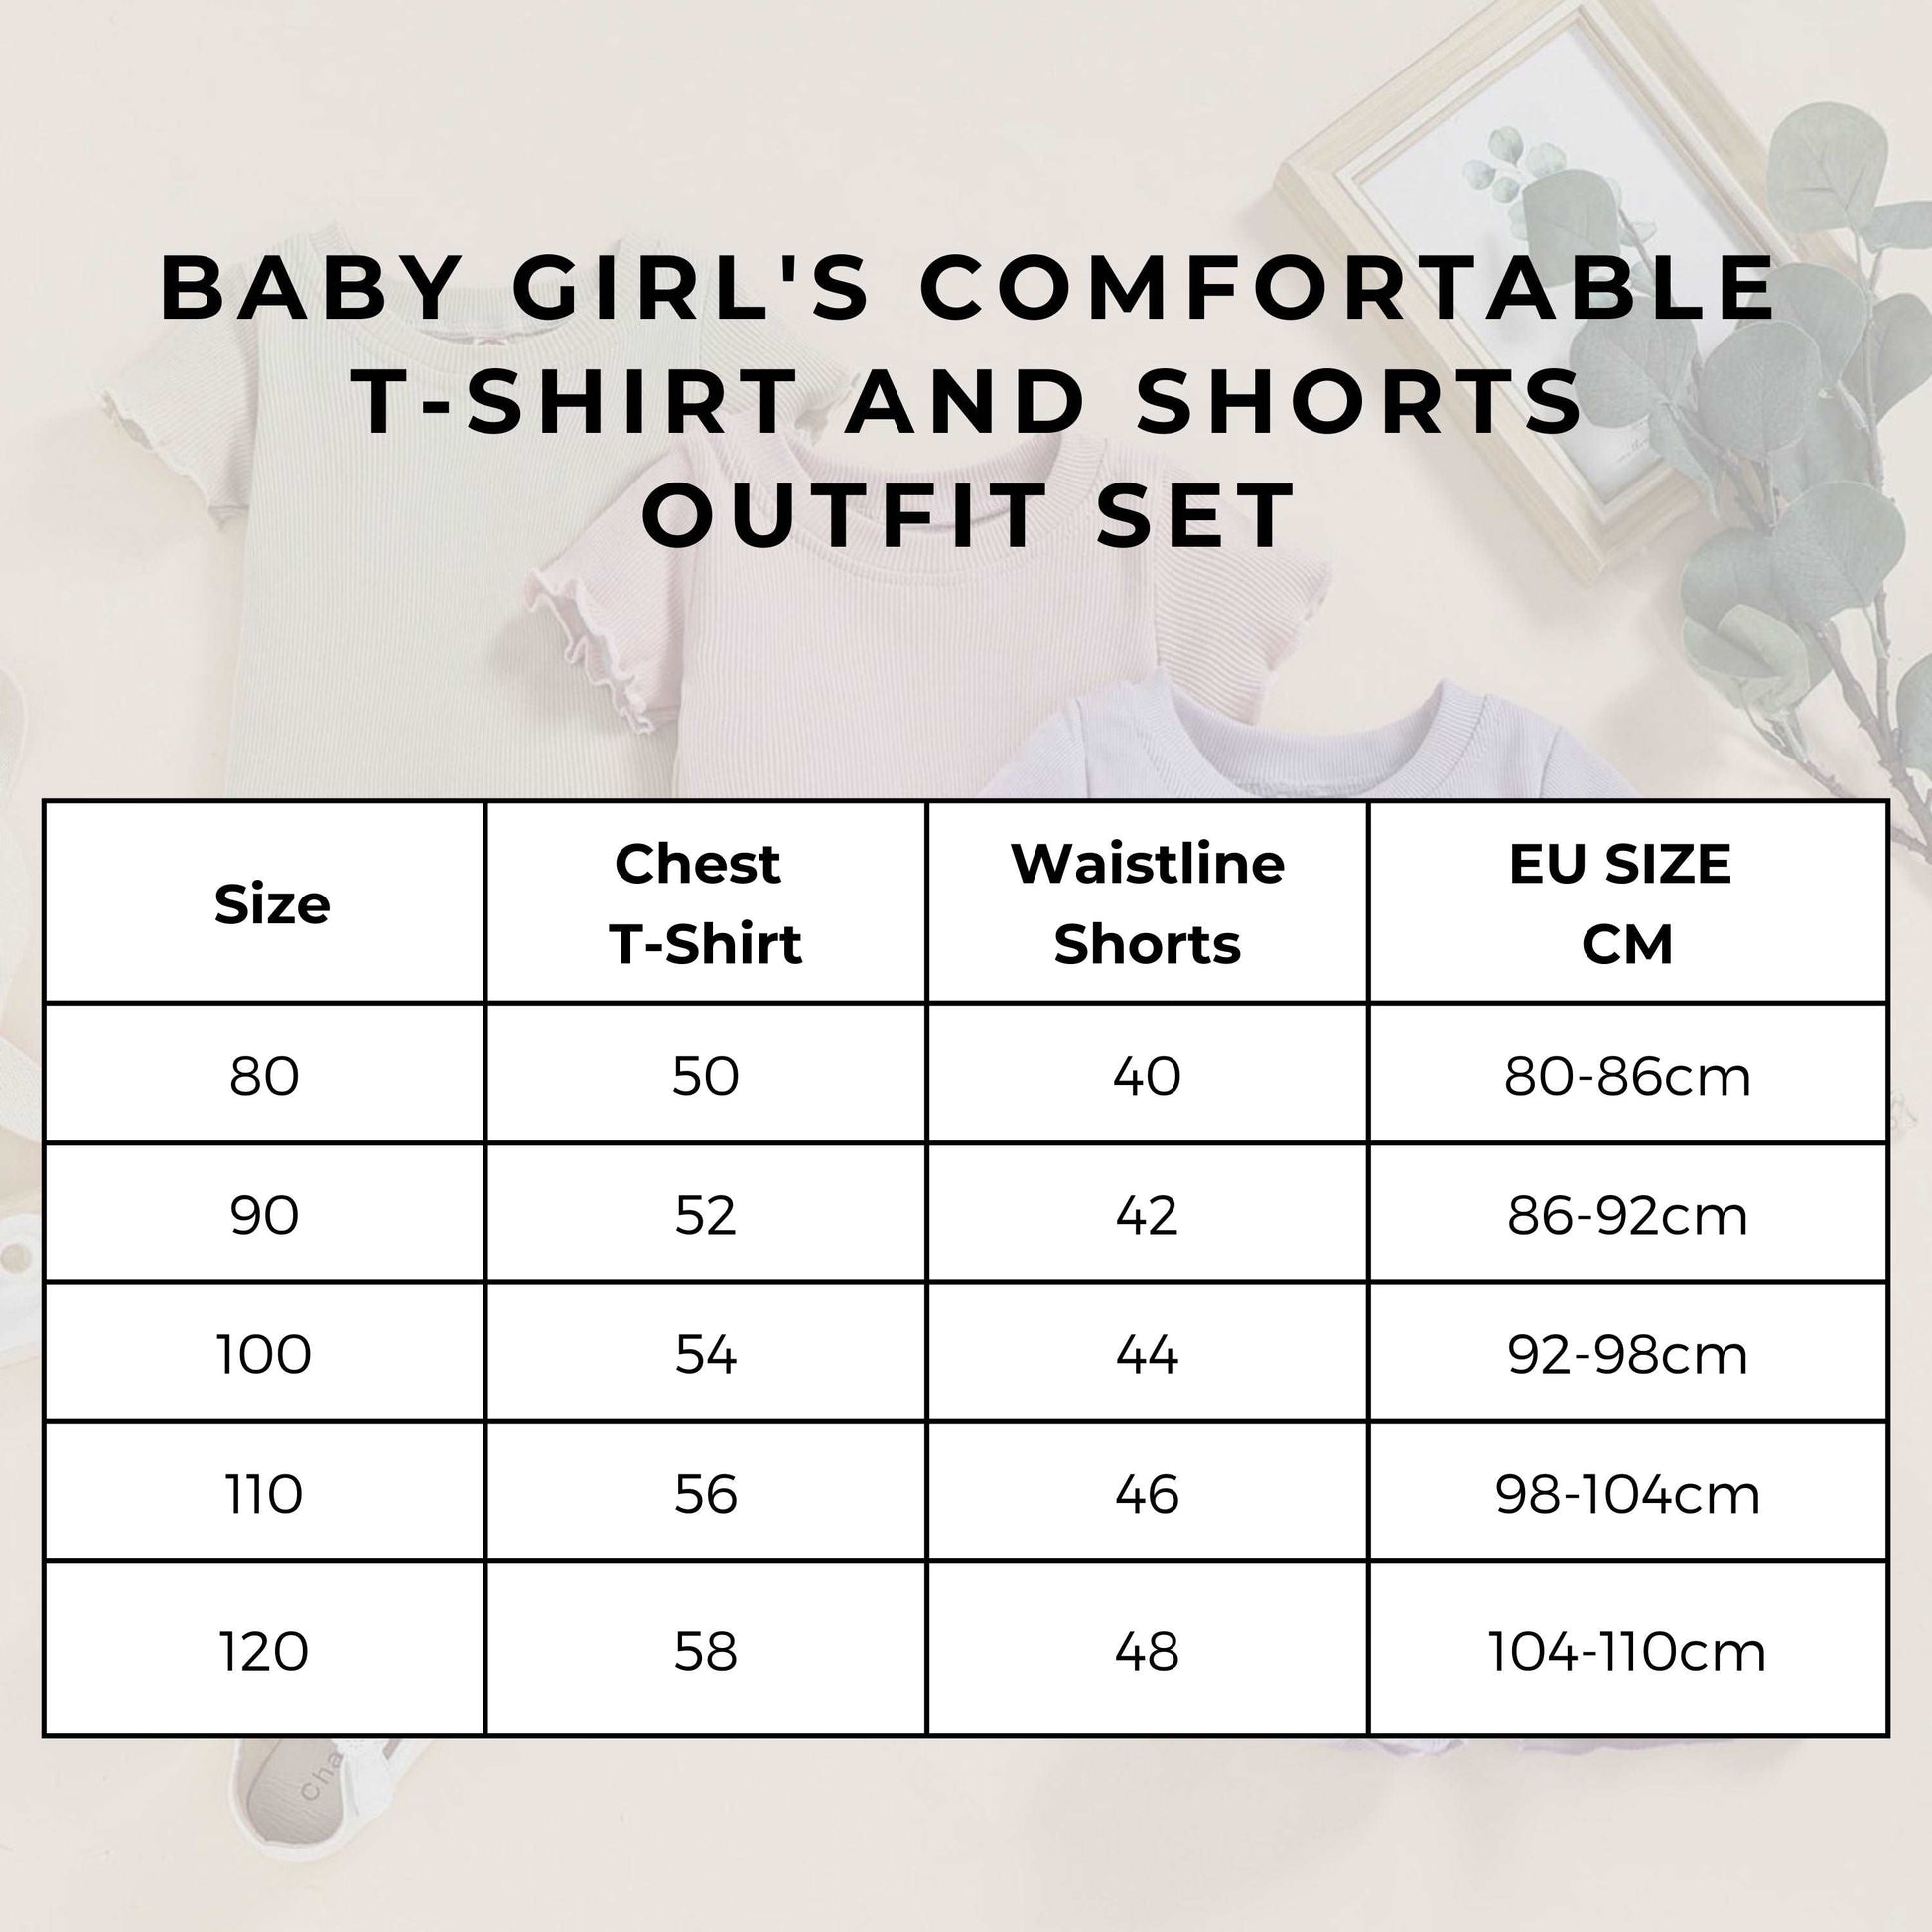 Baby Girl's Comfortable T-shirt and Shorts Outfit Set size